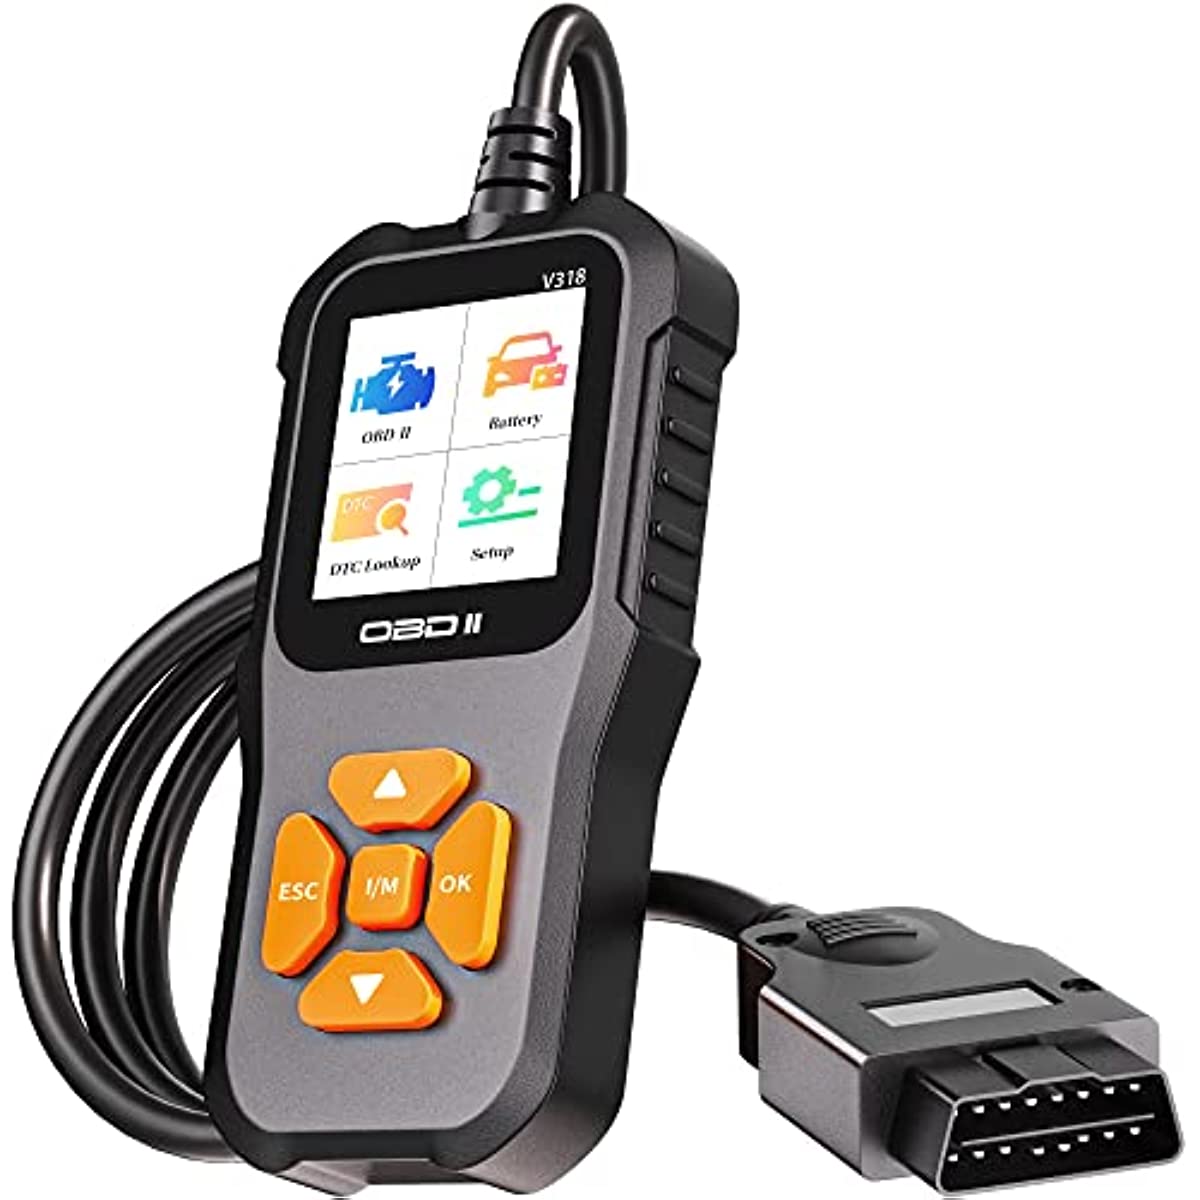 OBD2 Port Wiring: What protocol does your car use? – OBD2 Australia